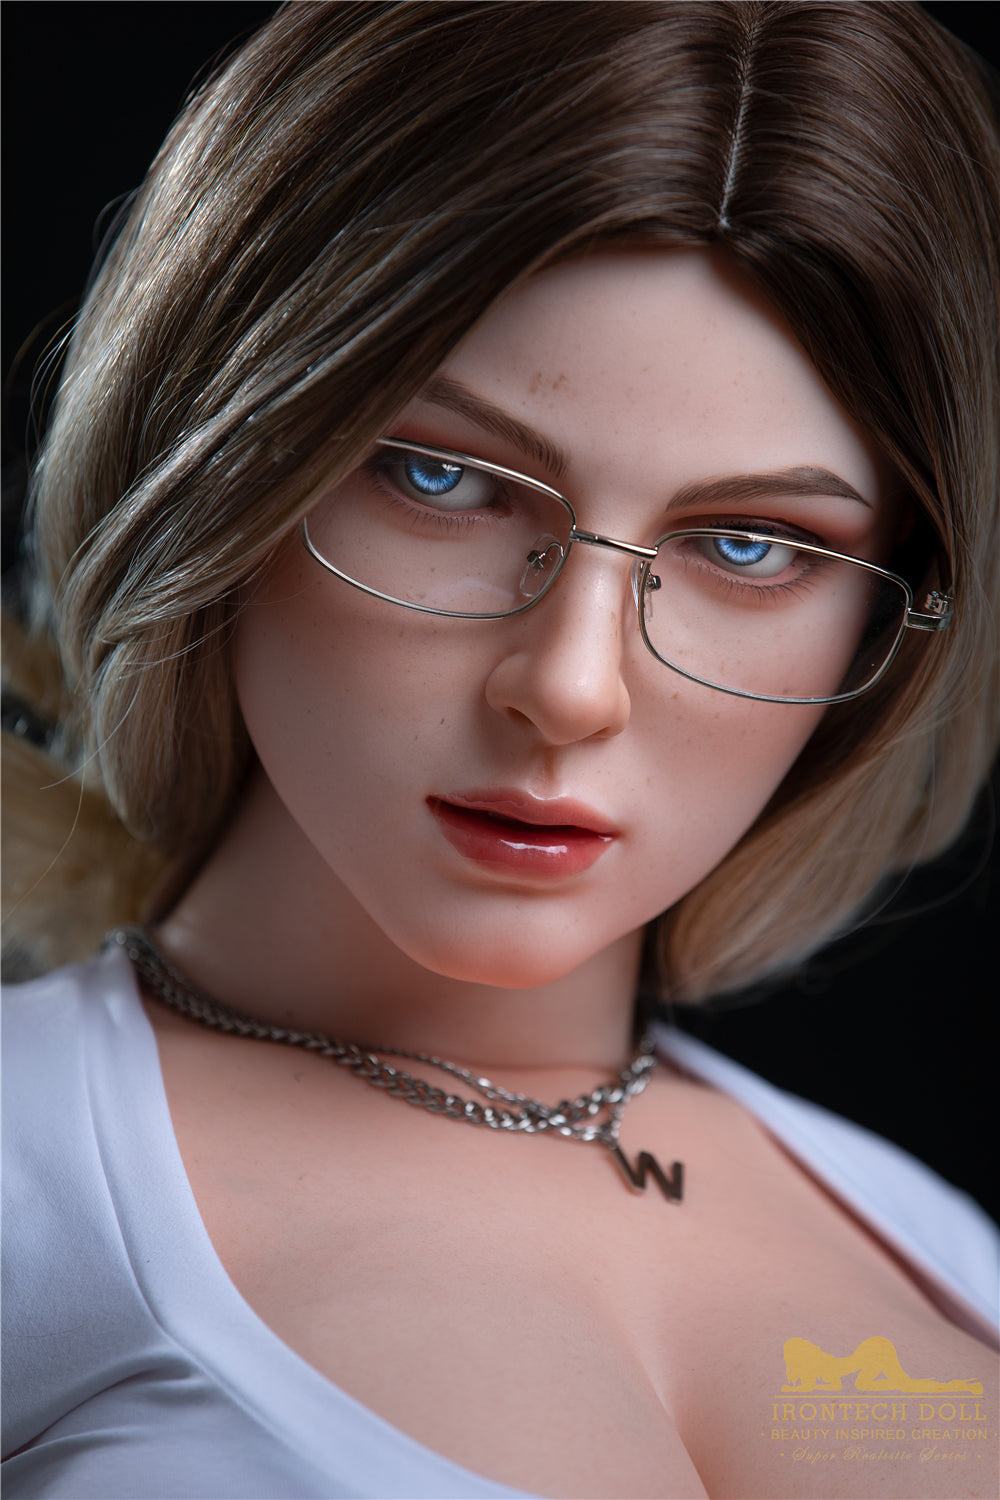 Irontech Doll 165 cm F Silicone - Fenny | Buy Sex Dolls at DOLLS ACTUALLY